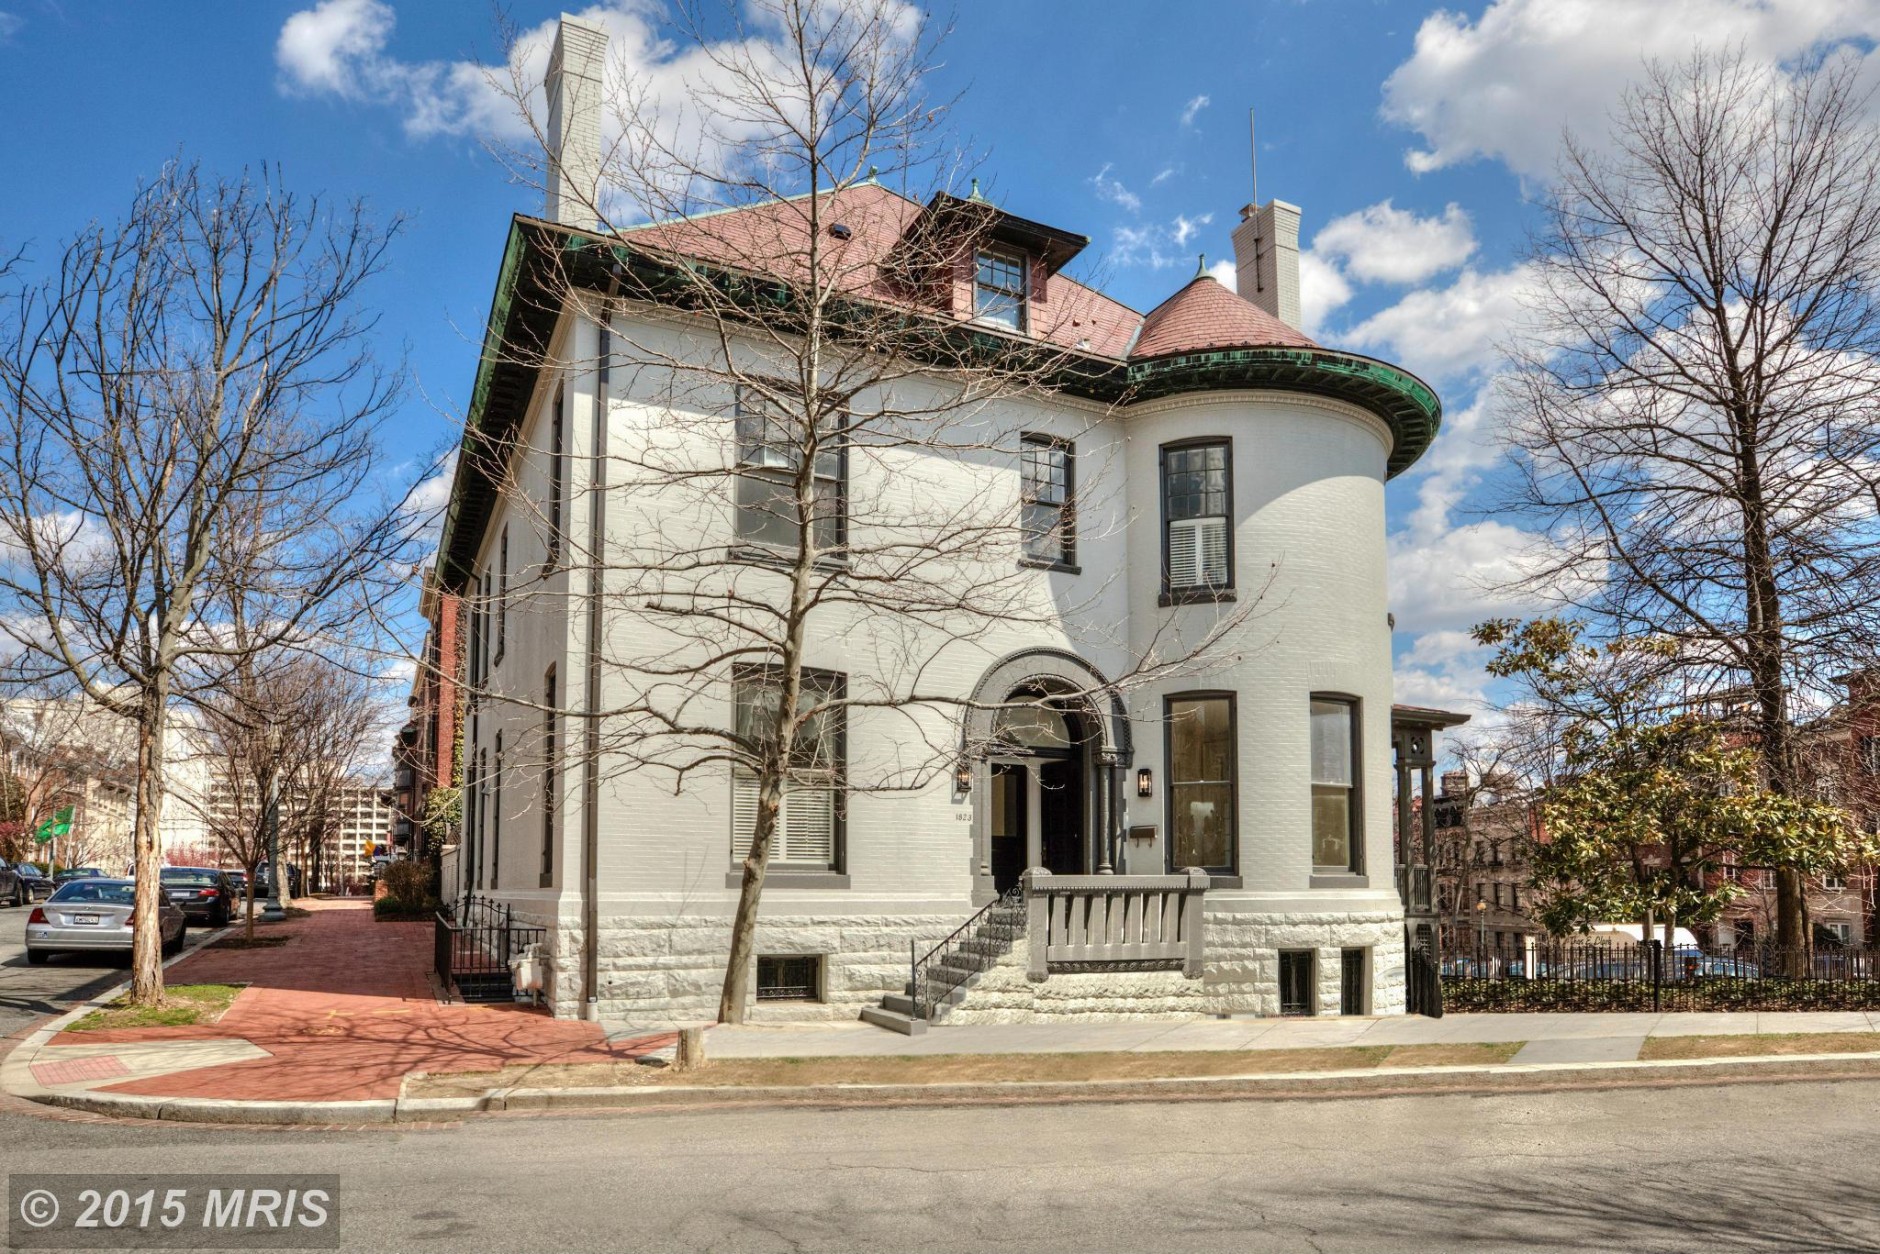 #7. This home, located at 1823 Phelps Place NW, Washington D.C., sold for $5.75 million. (Metropolitan Regional Information Systems, Inc./Metropolitan Regional Information Systems, Inc.)